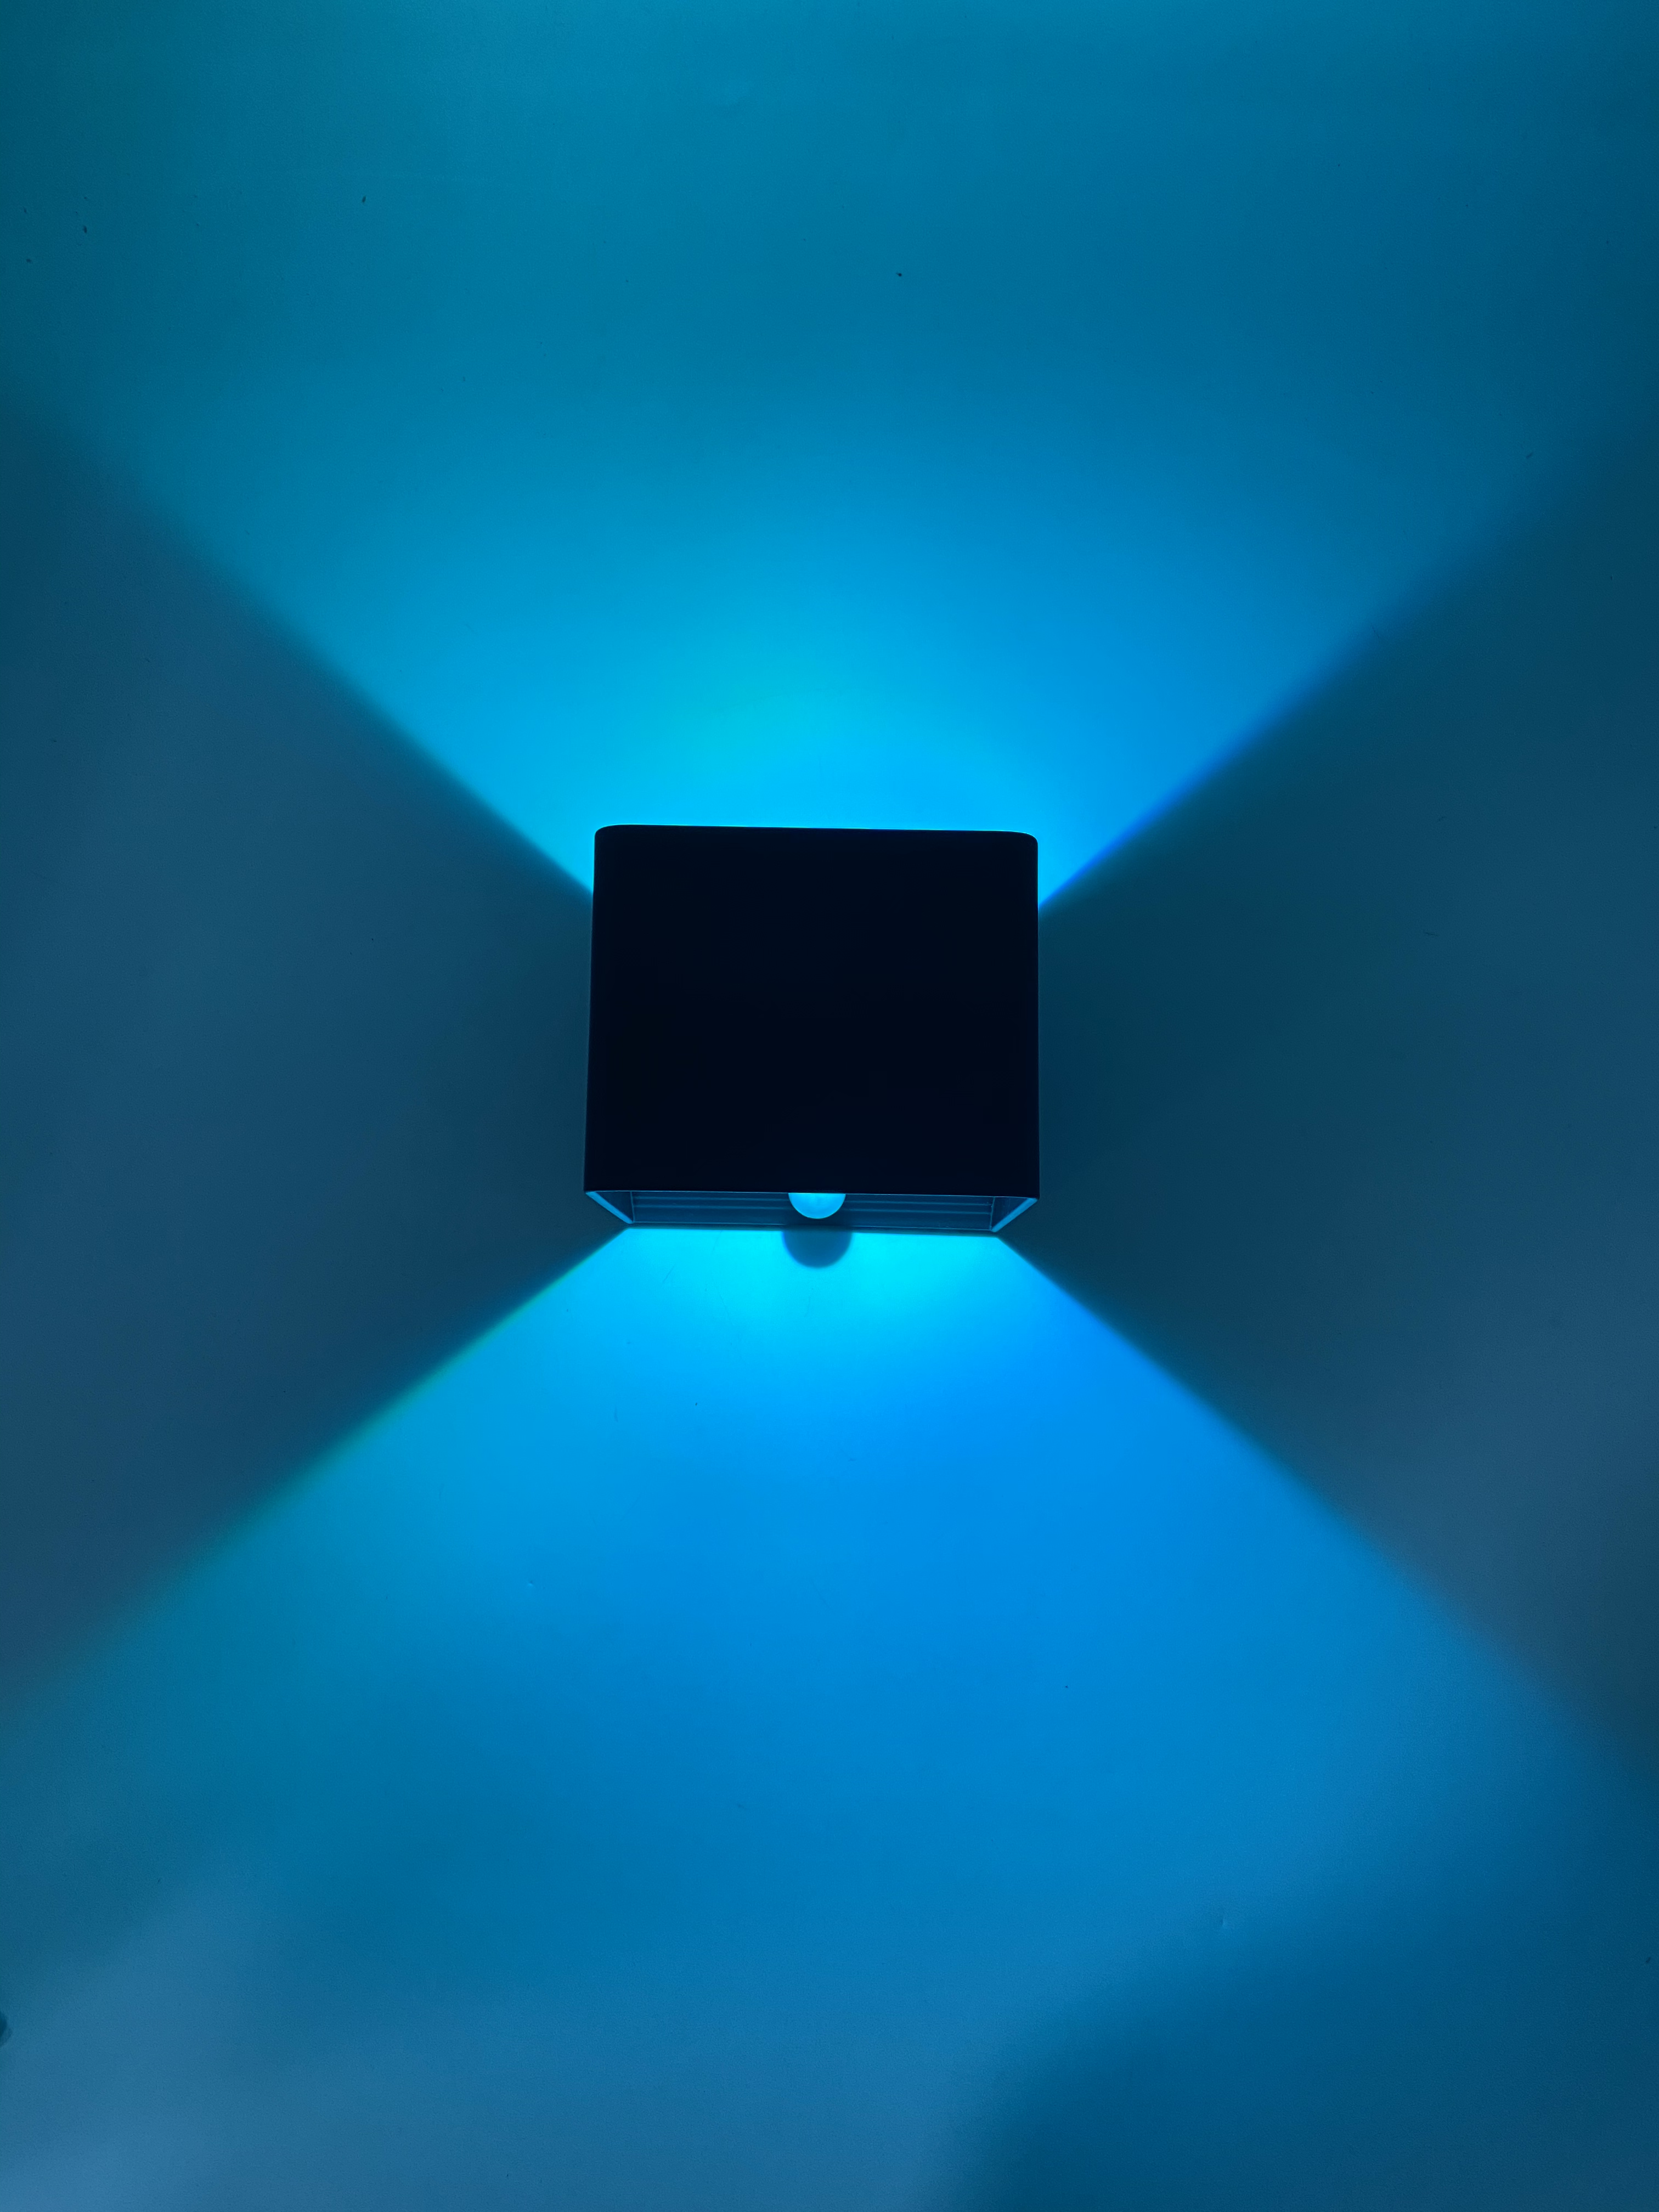 Led Wall Sconce